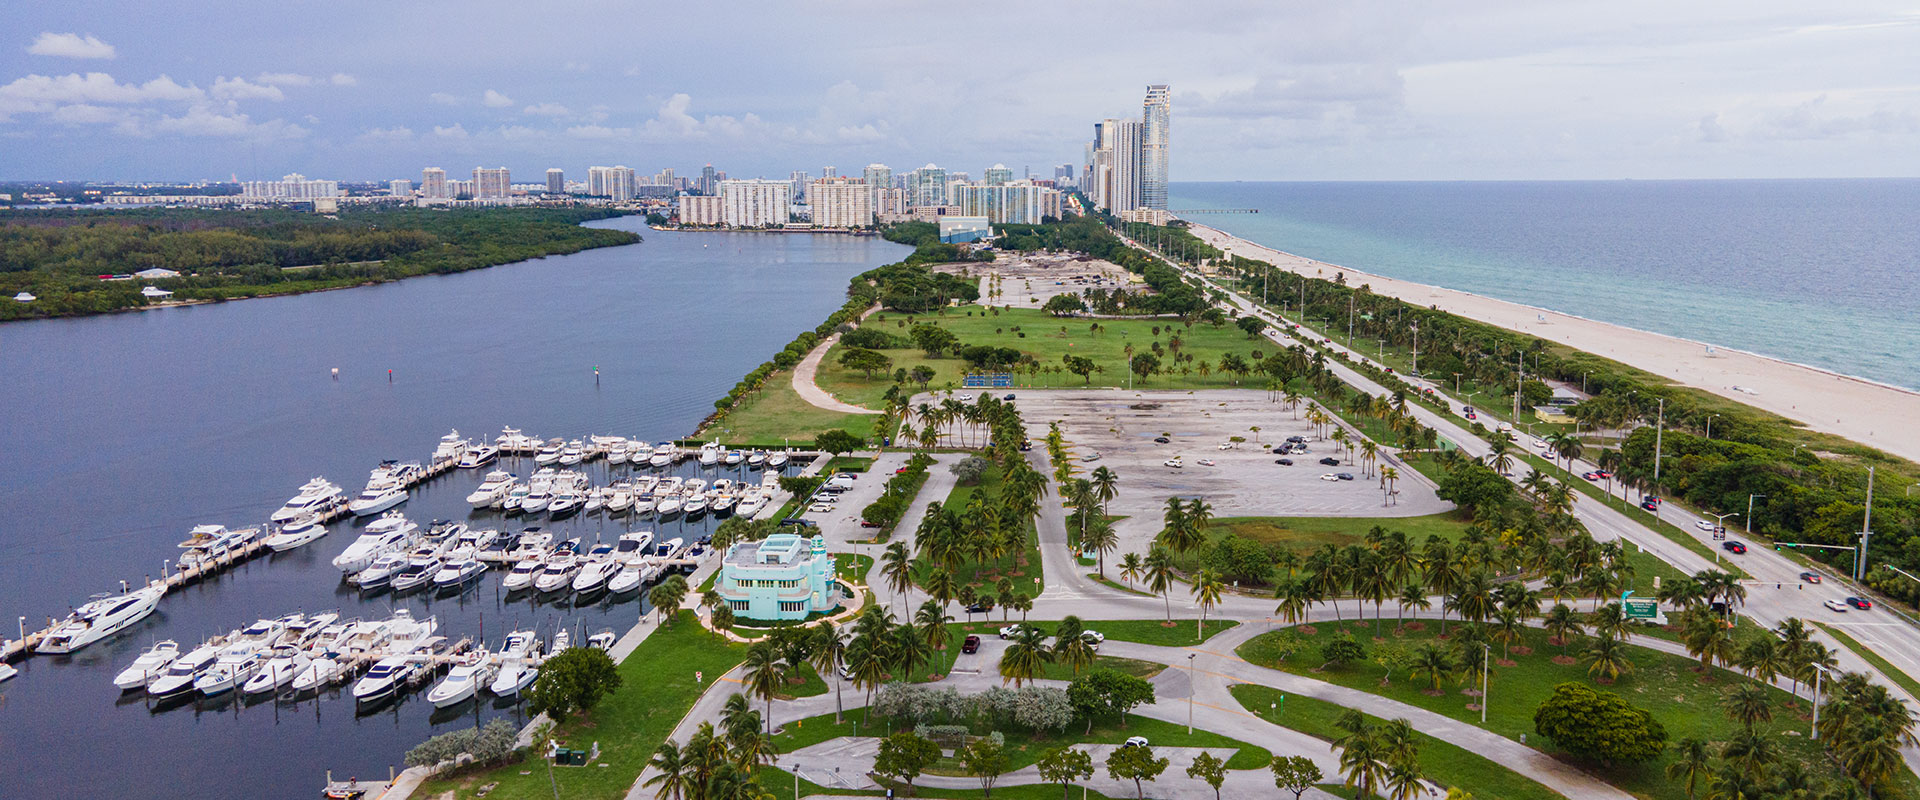 Haulover Park aerial view